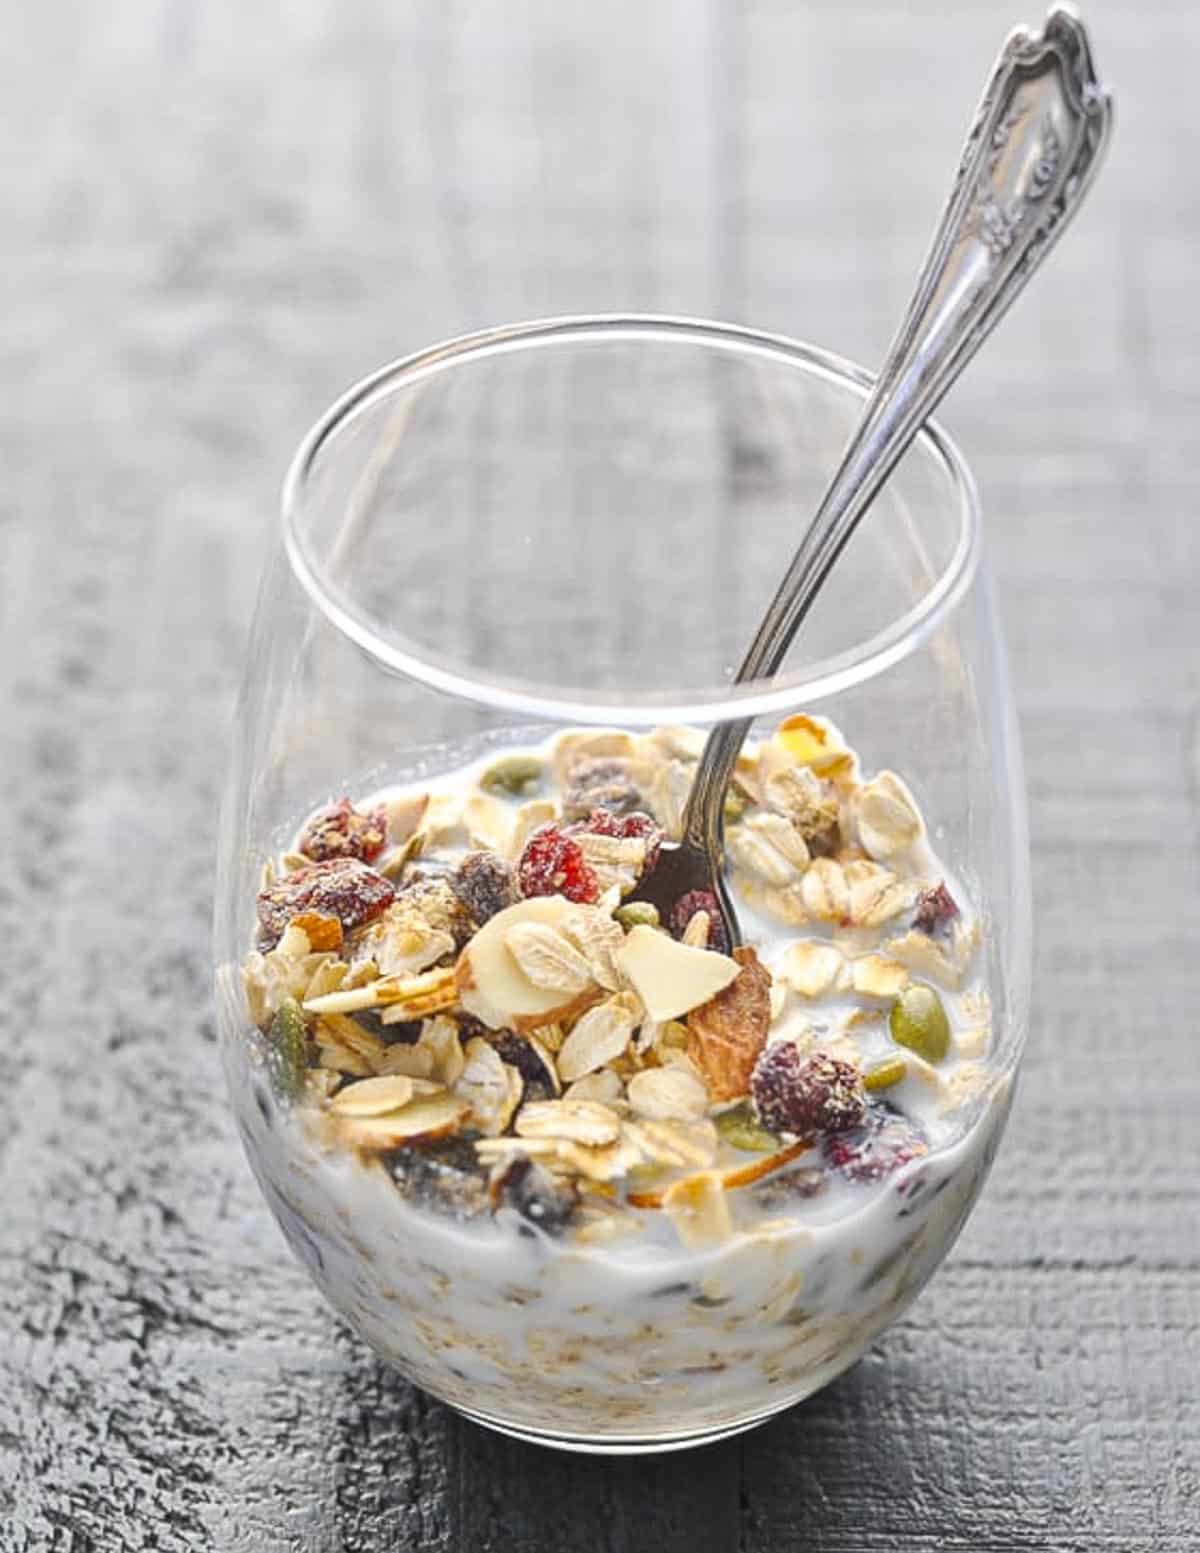 Swiss muesli in a glass with milk and a spoon.